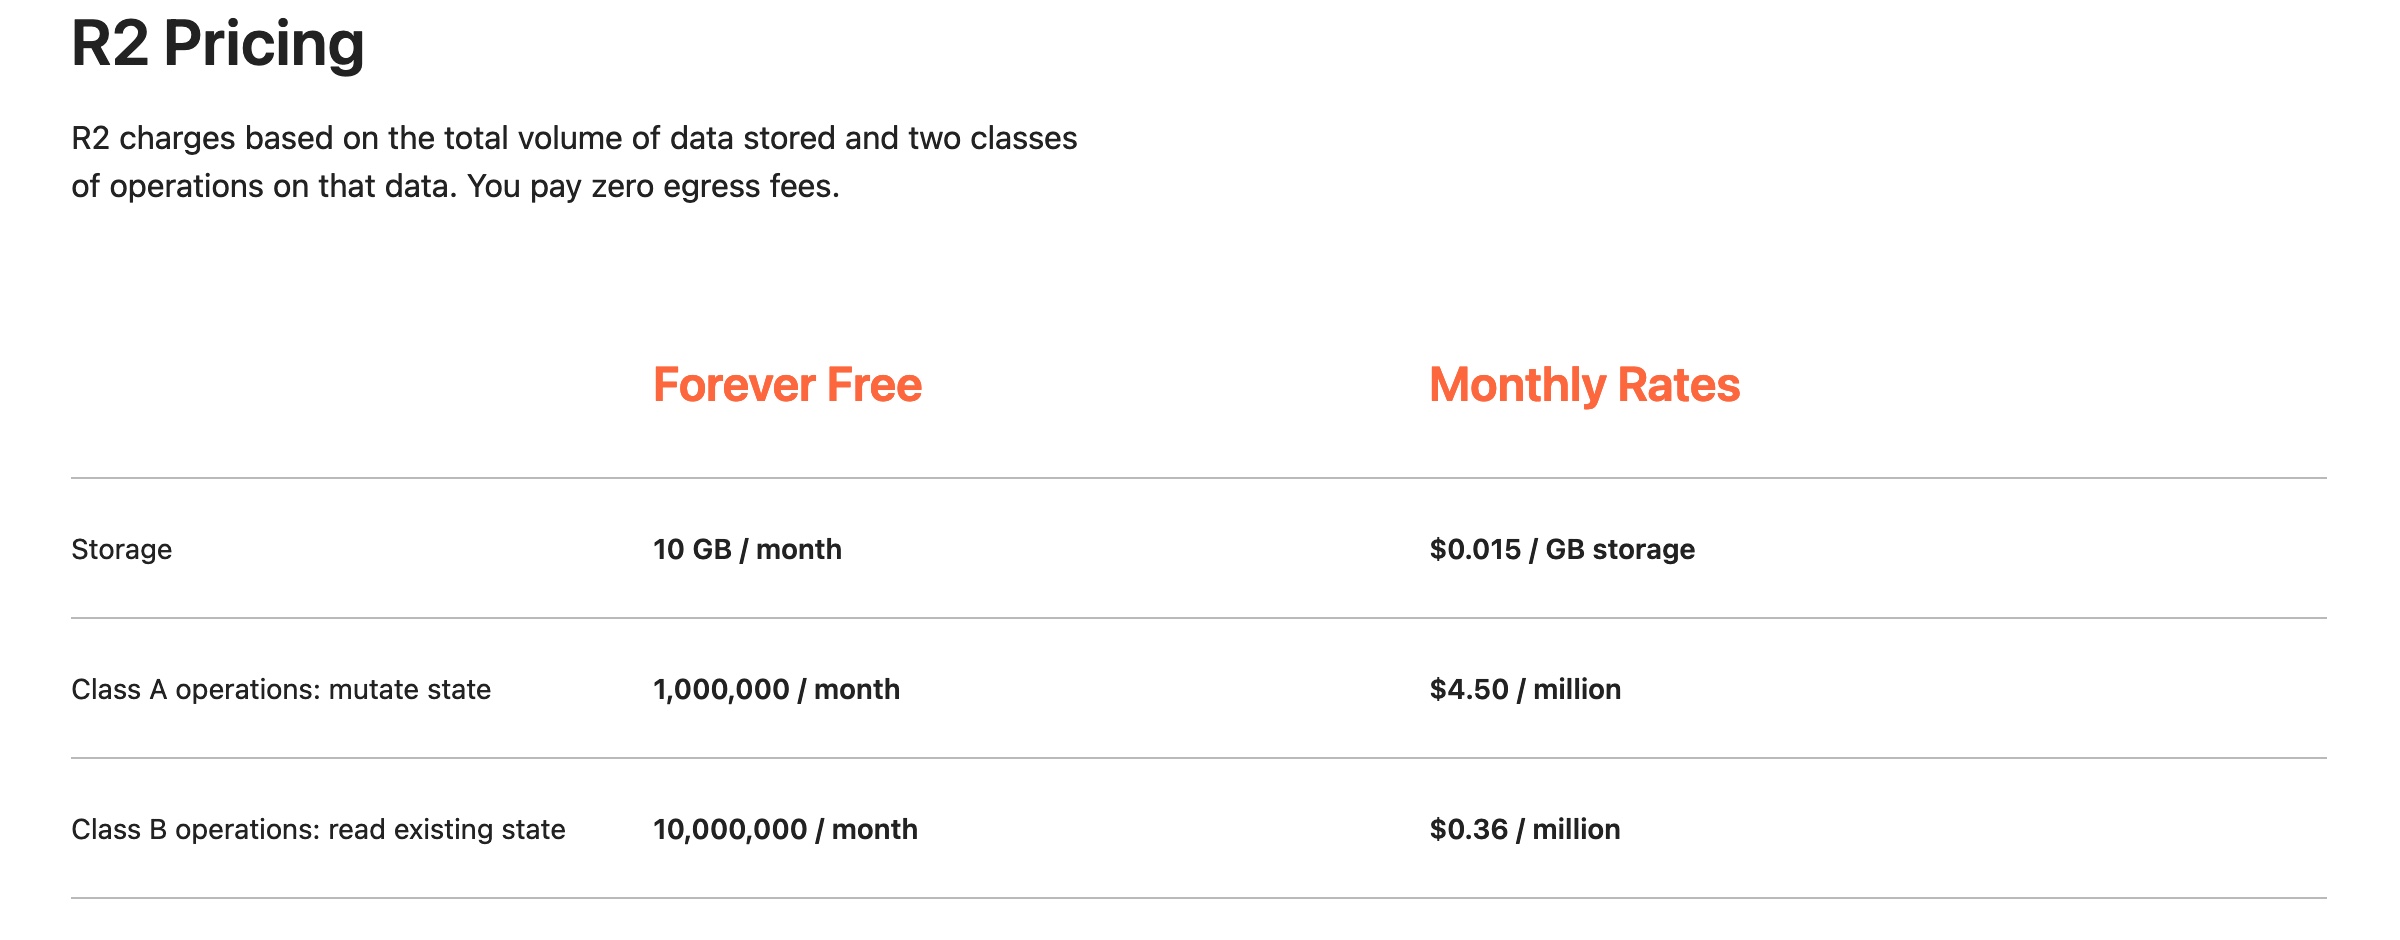 A table of the pricing structure for Cloudflare R2